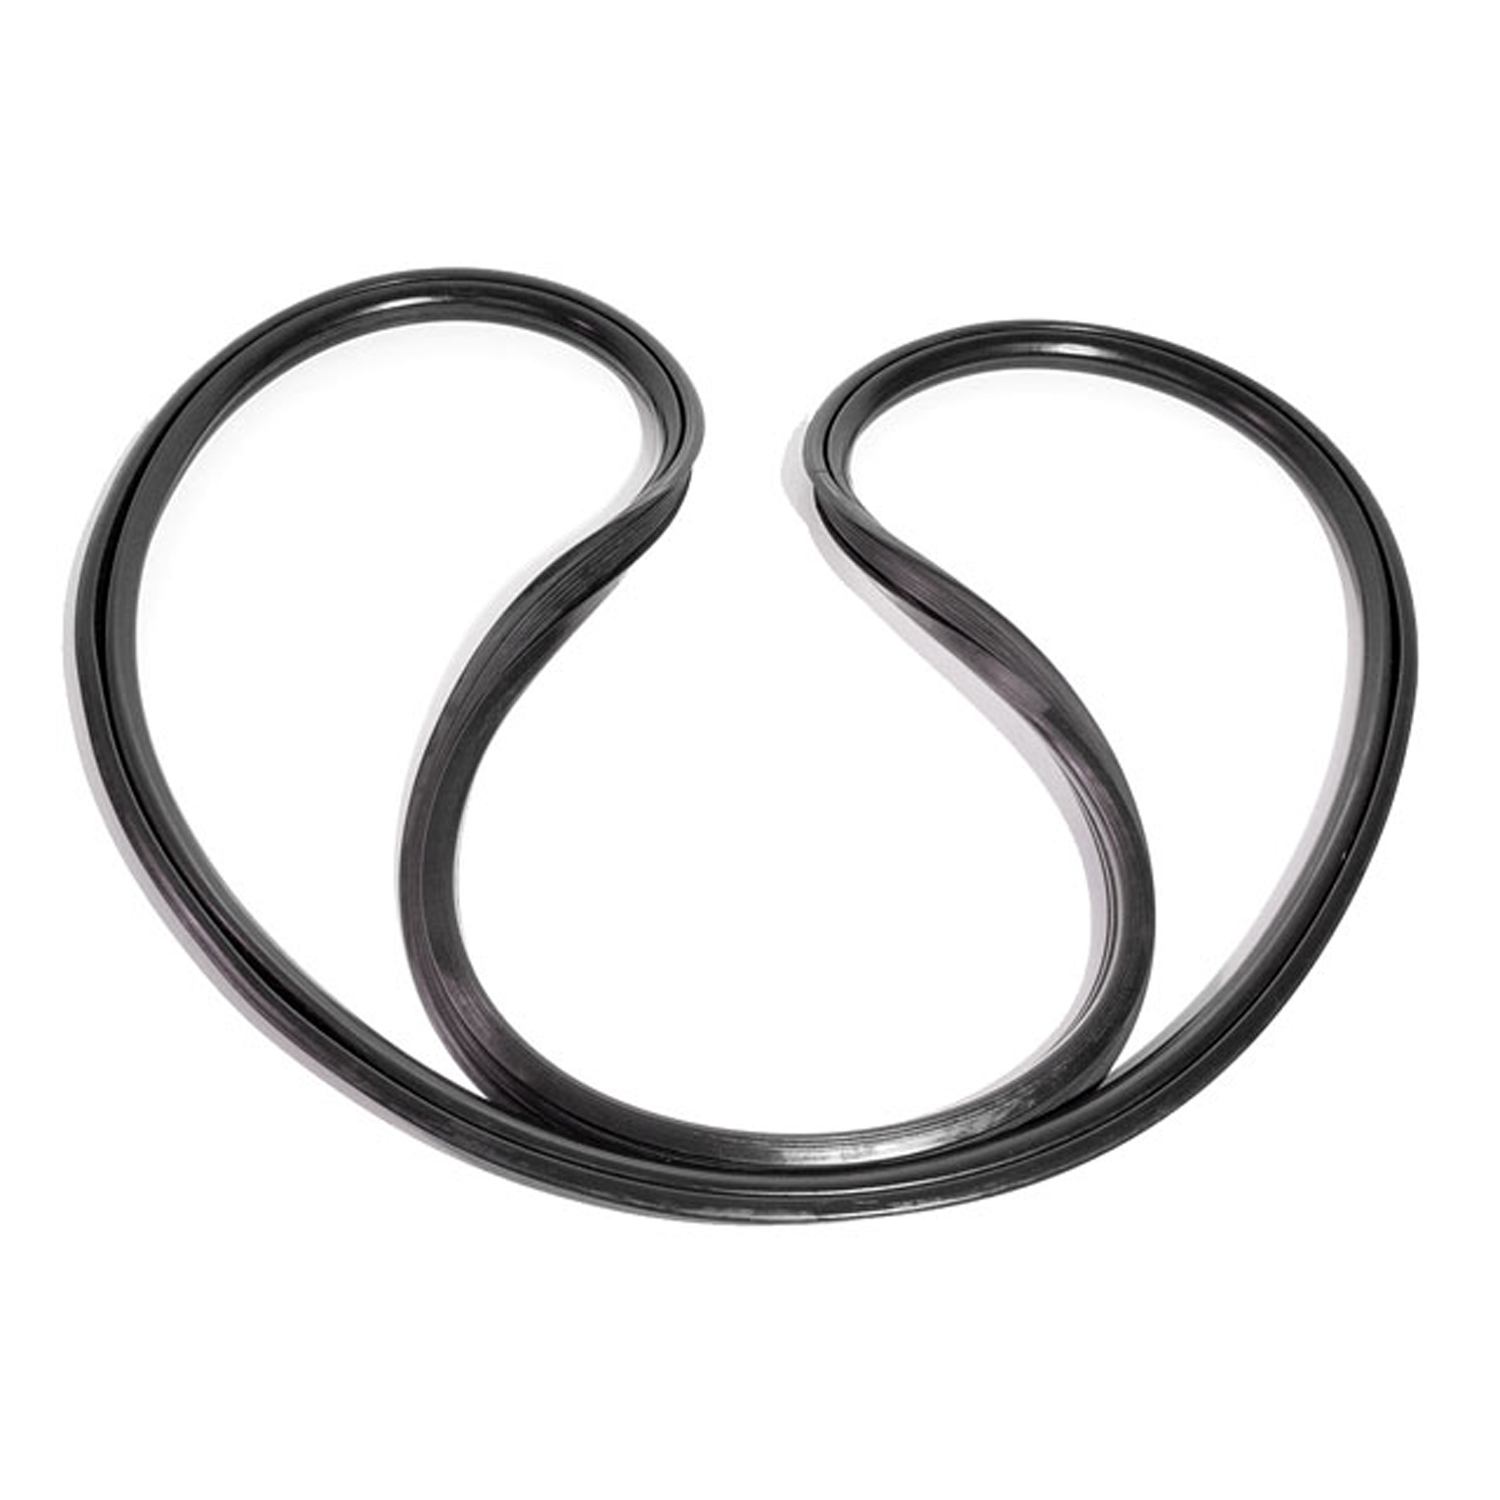 1953 Oldsmobile Deluxe 88 Vulcanized Windshield Seal.  For hardtops and convertibles-VWS 7300